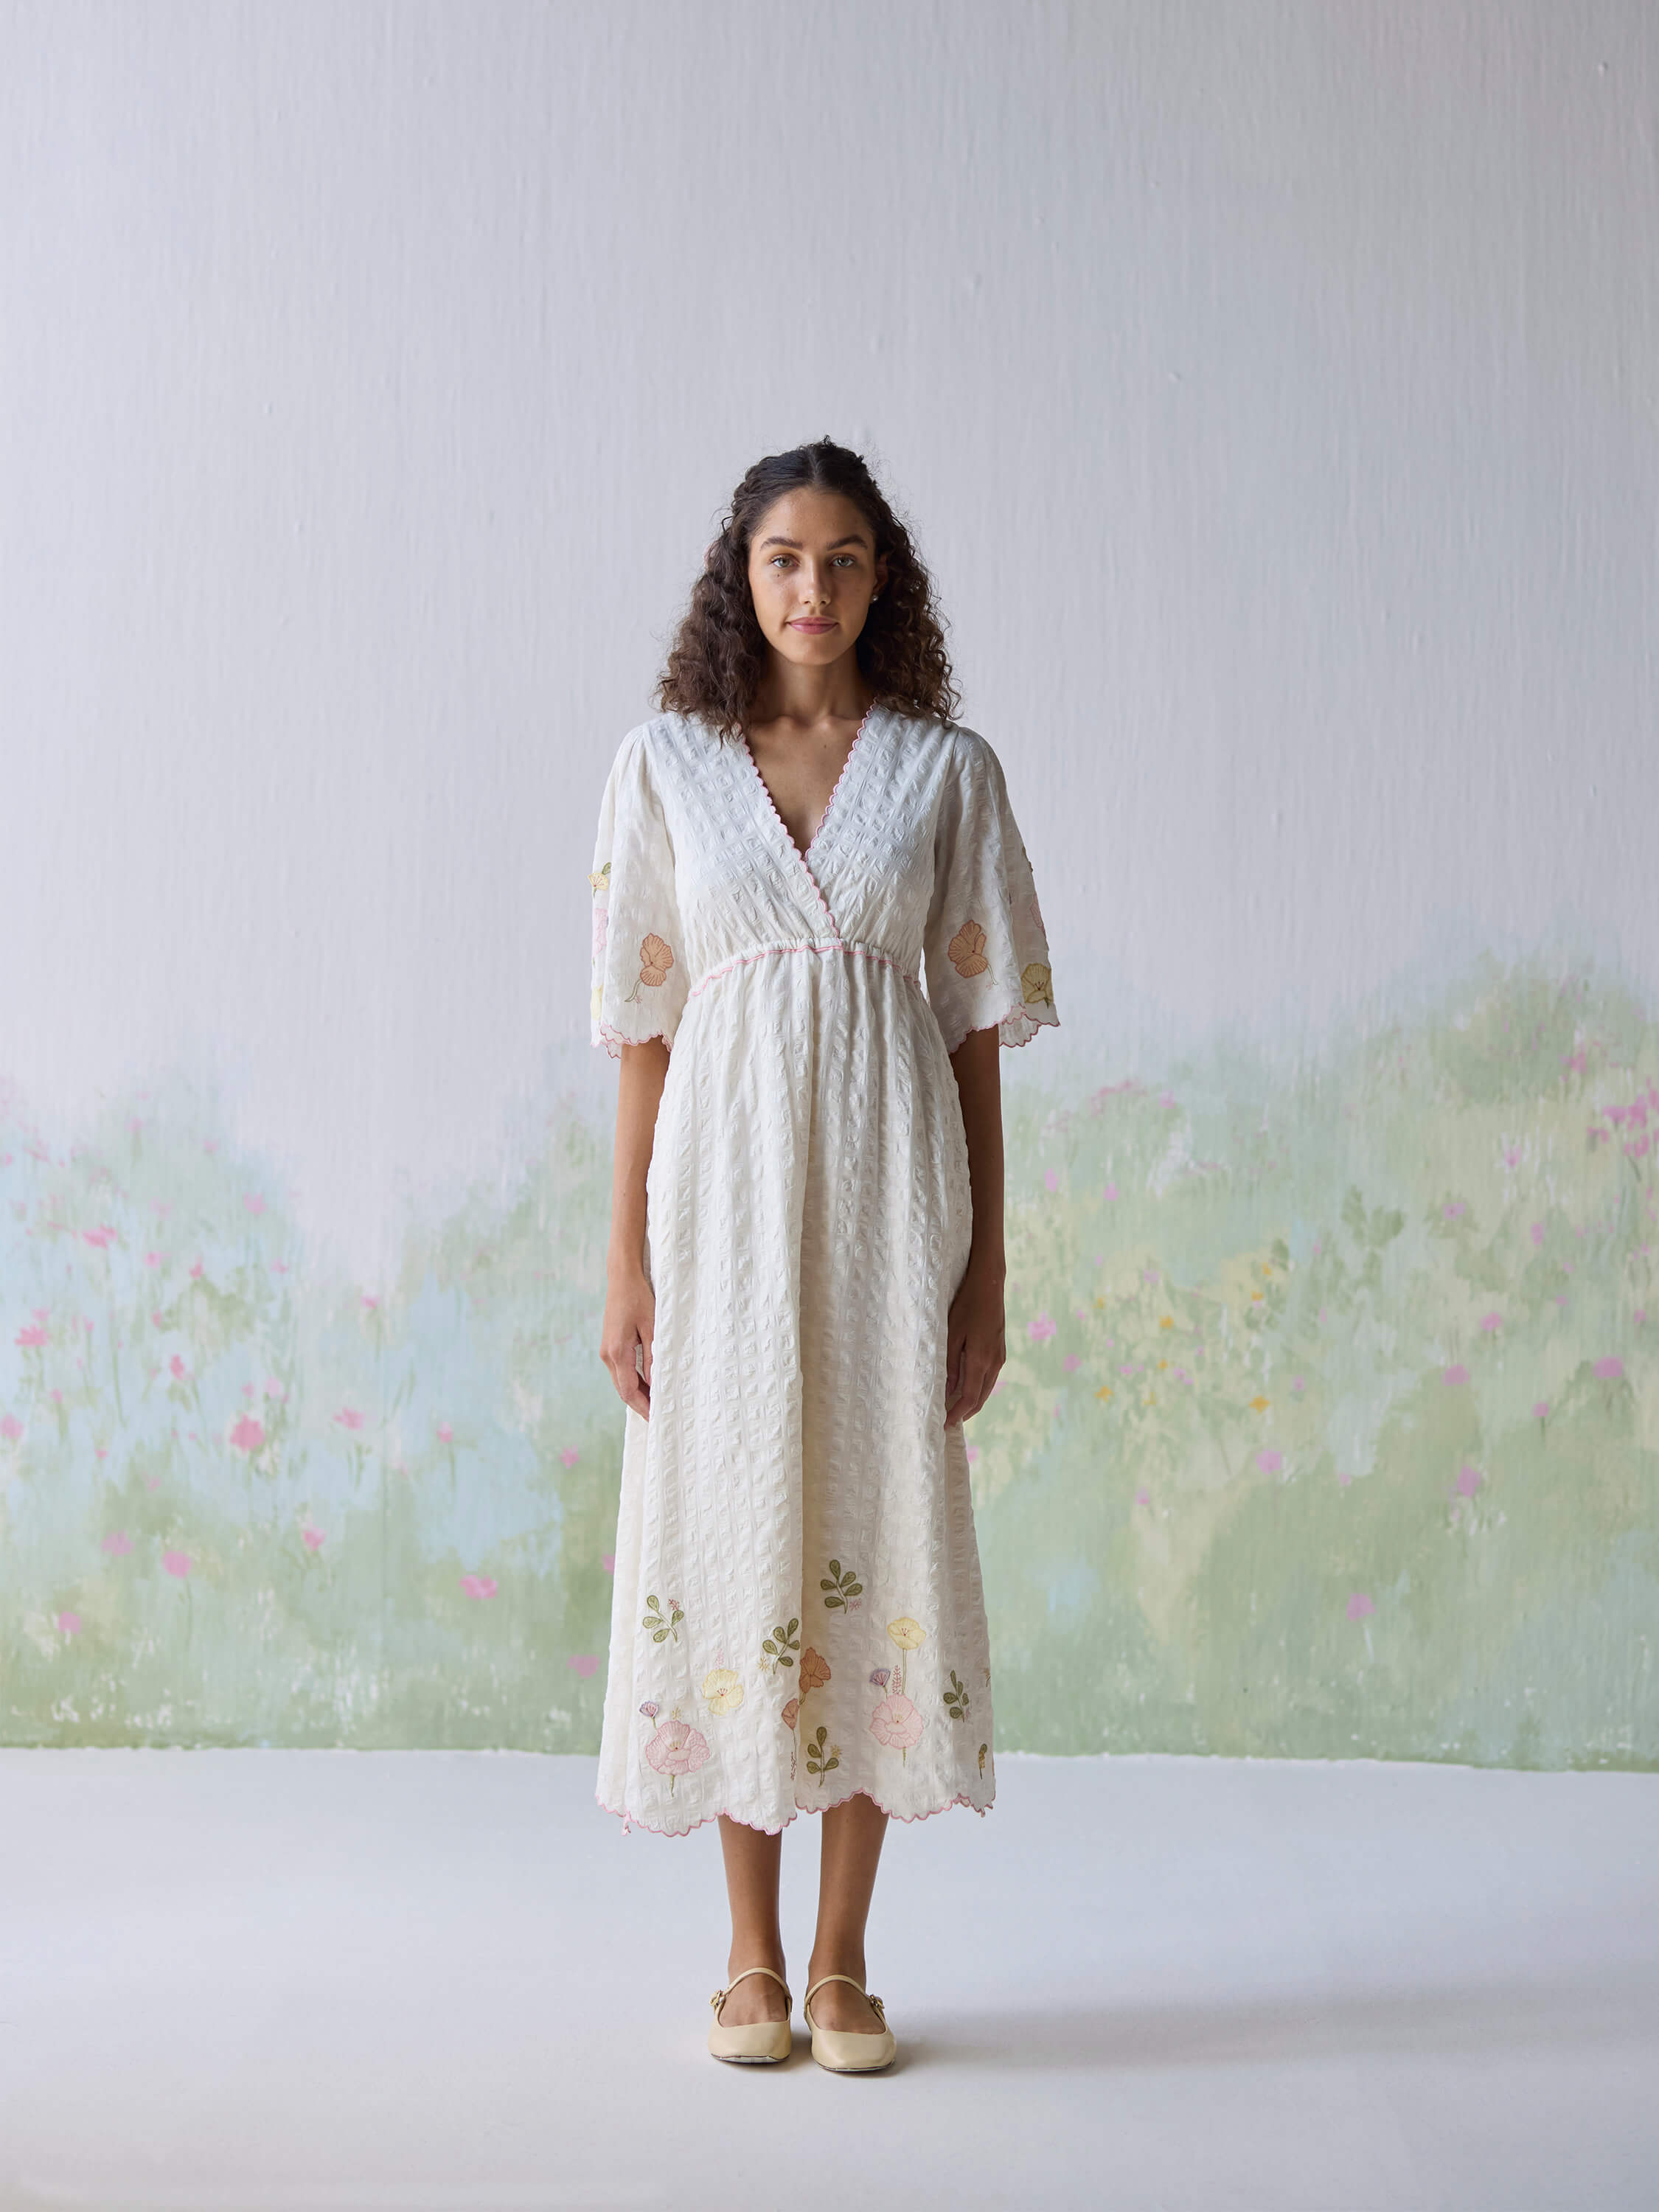 Woman wearing floral embroidered white dress standing against a pastel background.